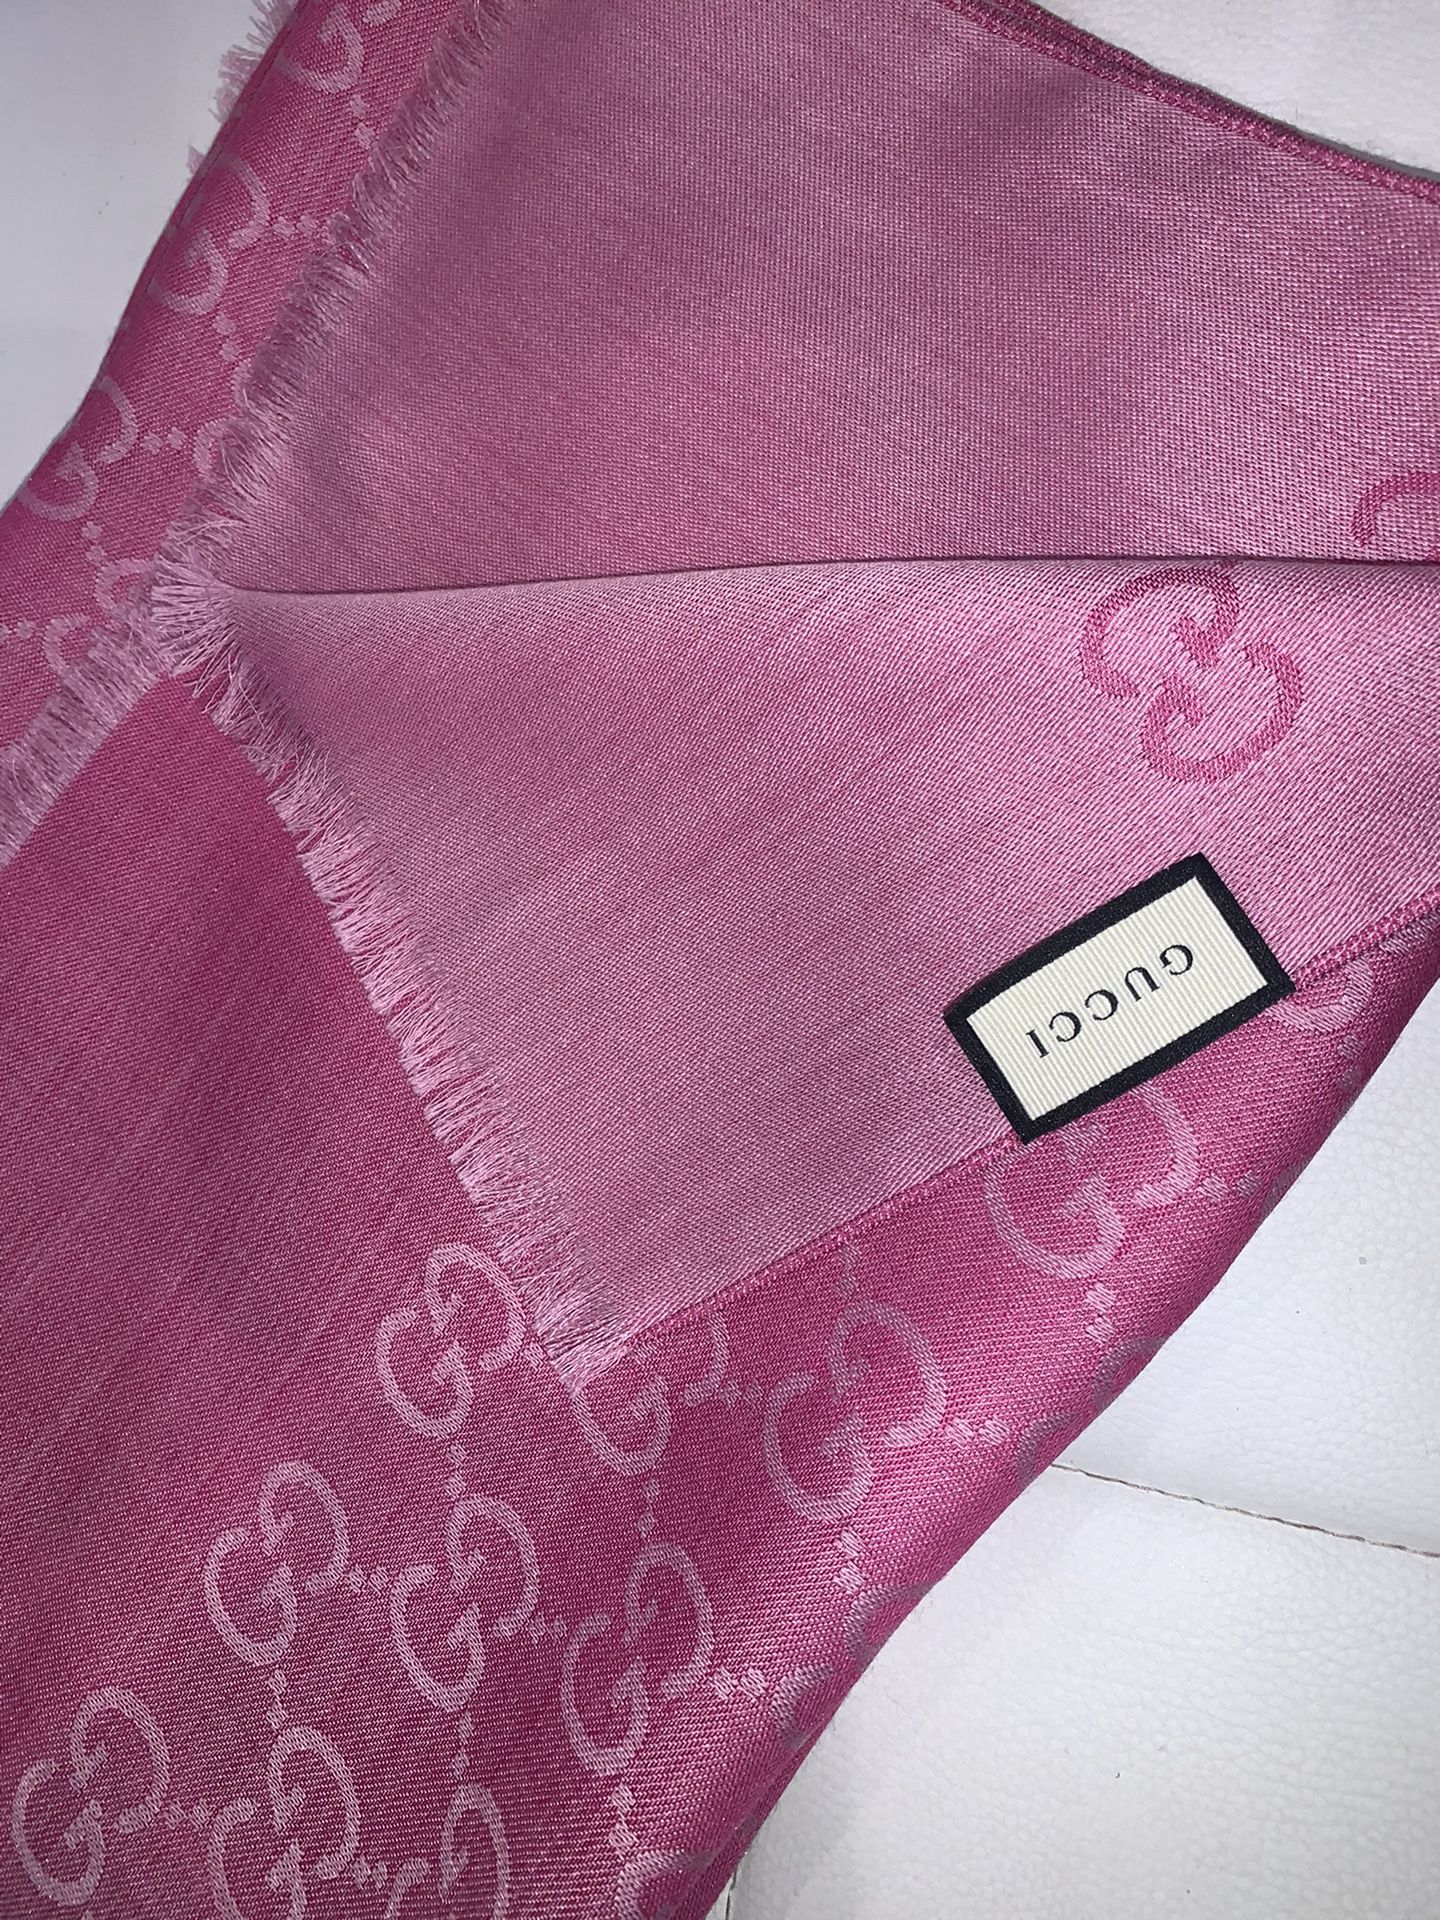 Gucci Wool Scarf Pink Two Tone Authentic 